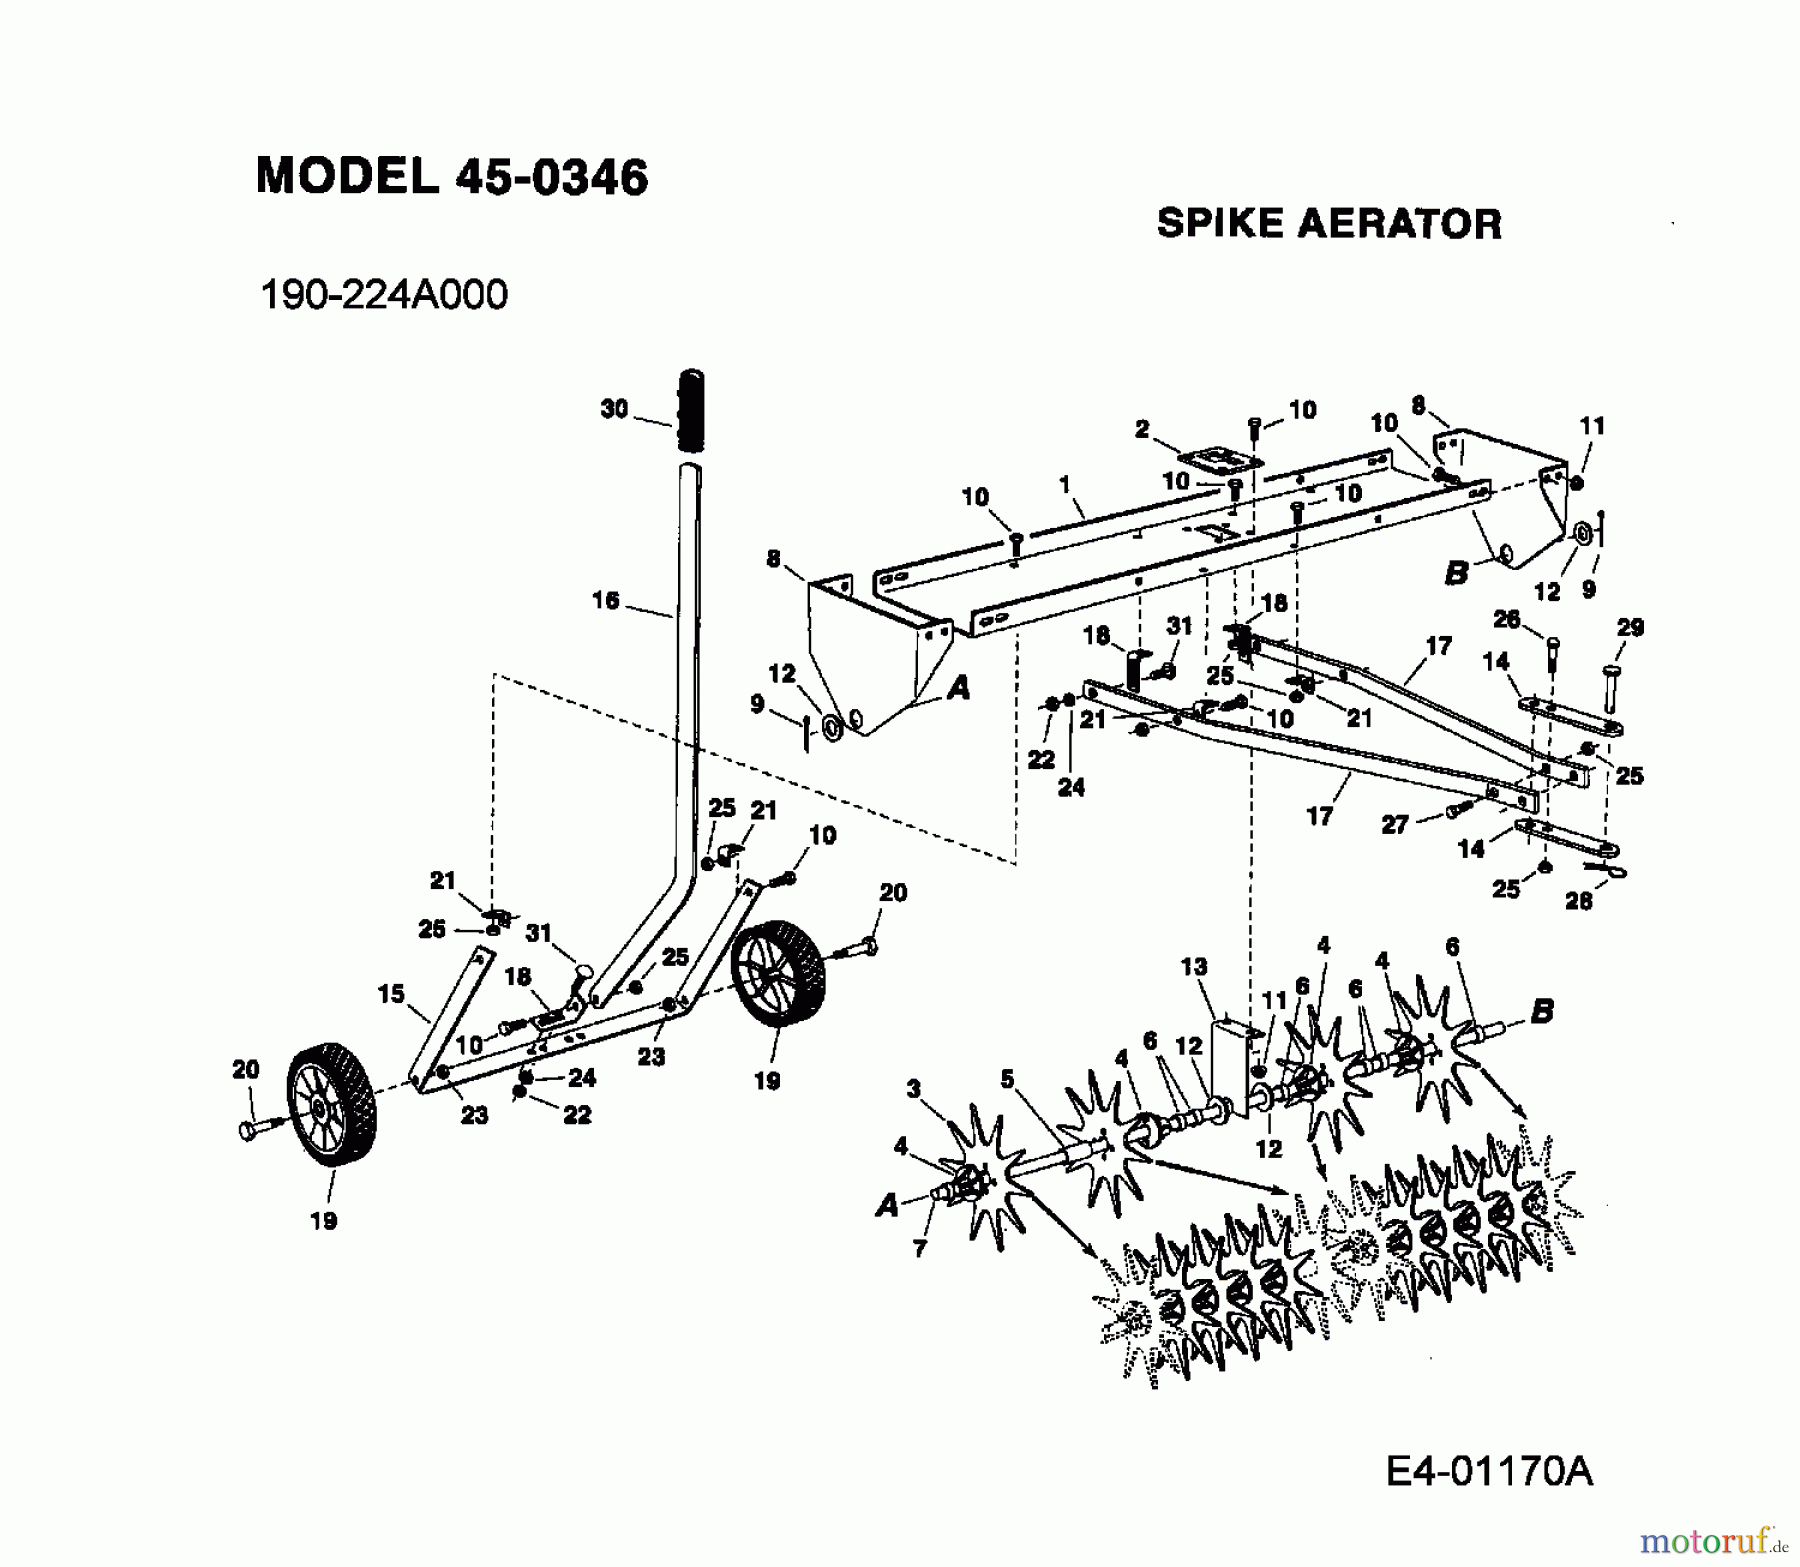  MTD Accessories Accessories garden and lawn tractors Groomer 45-0346  (190-224A000) 190-224A000  (2003) Basic machine